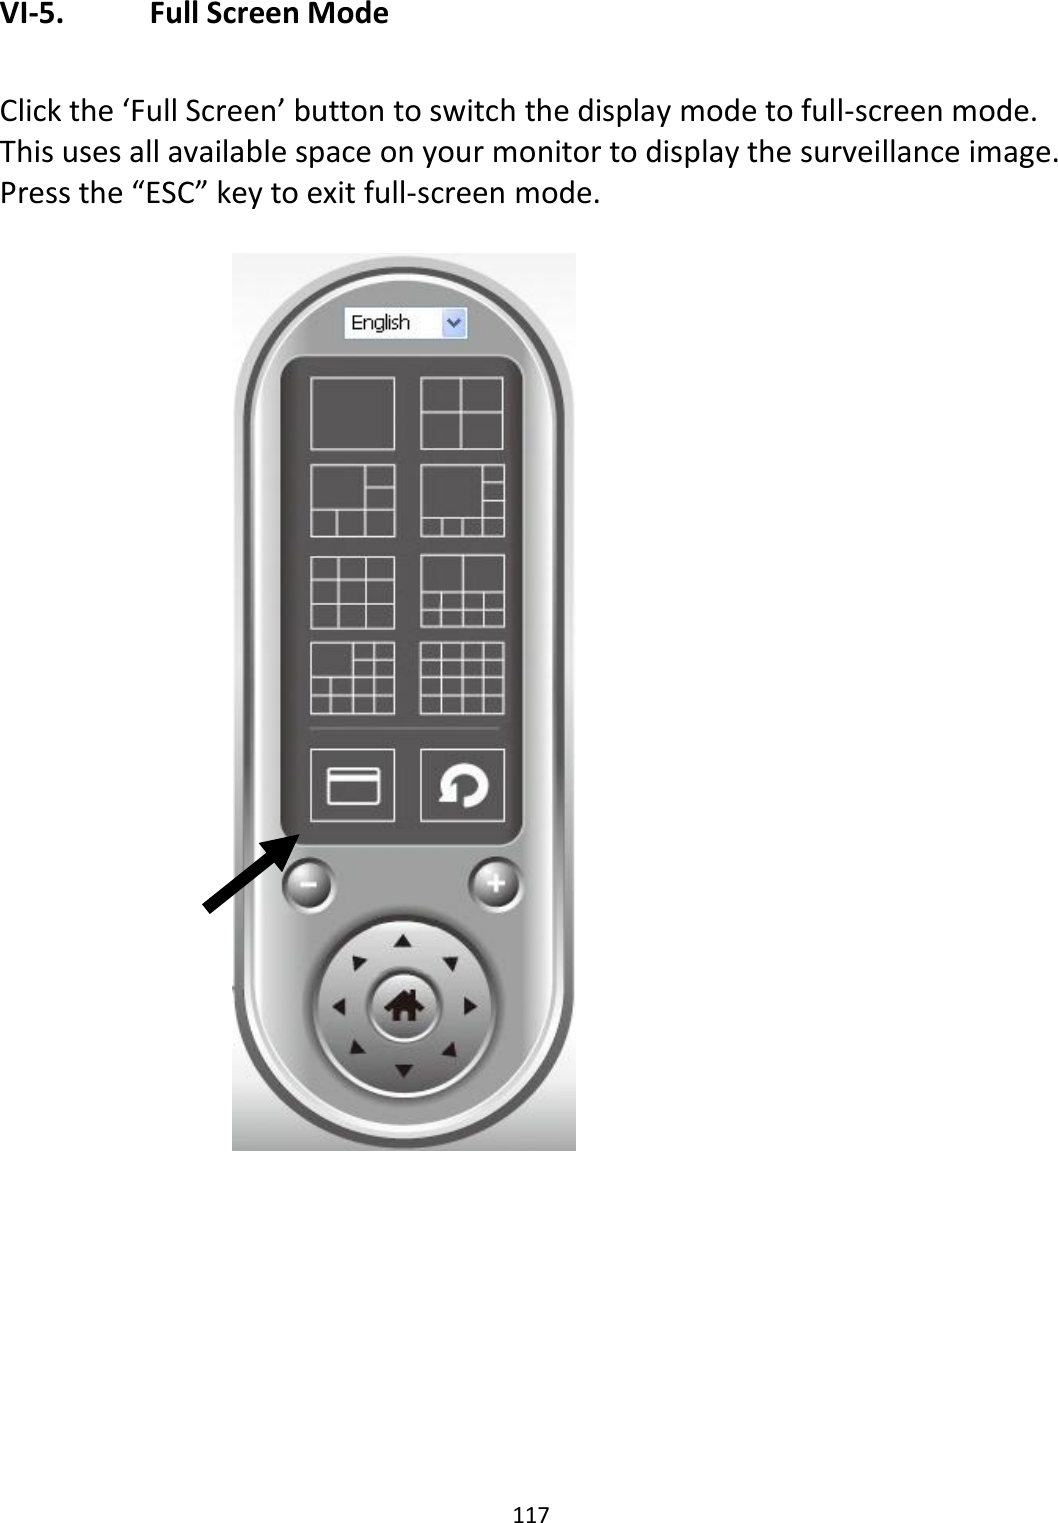 117  VI-5.   Full Screen Mode  Click the ‘Full Screen’ button to switch the display mode to full-screen mode. This uses all available space on your monitor to display the surveillance image. Press the “ESC” key to exit full-screen mode.    